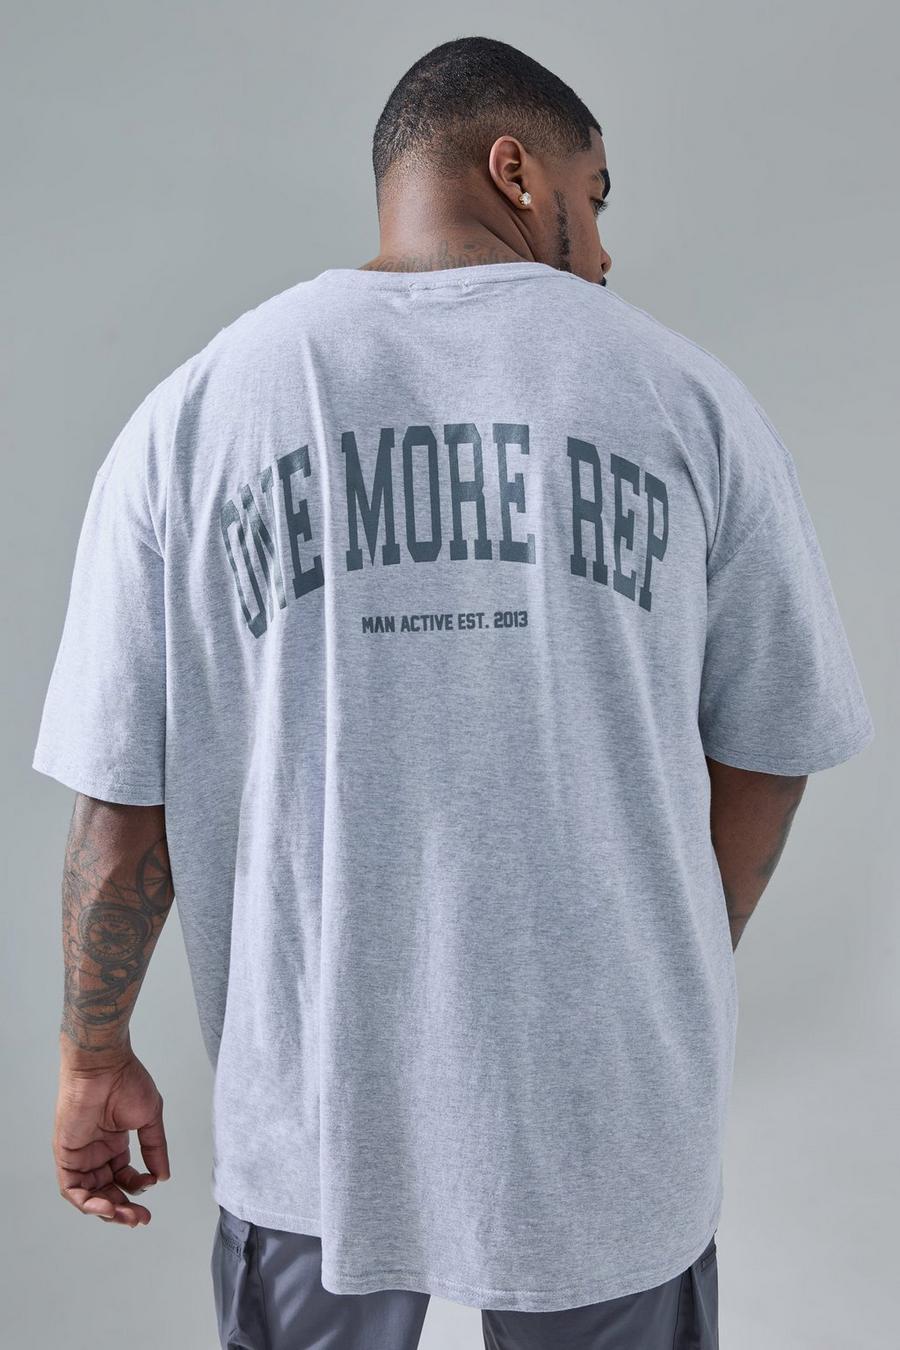 Grey marl Plus MAN Active One More Rep Oversize t-shirt image number 1